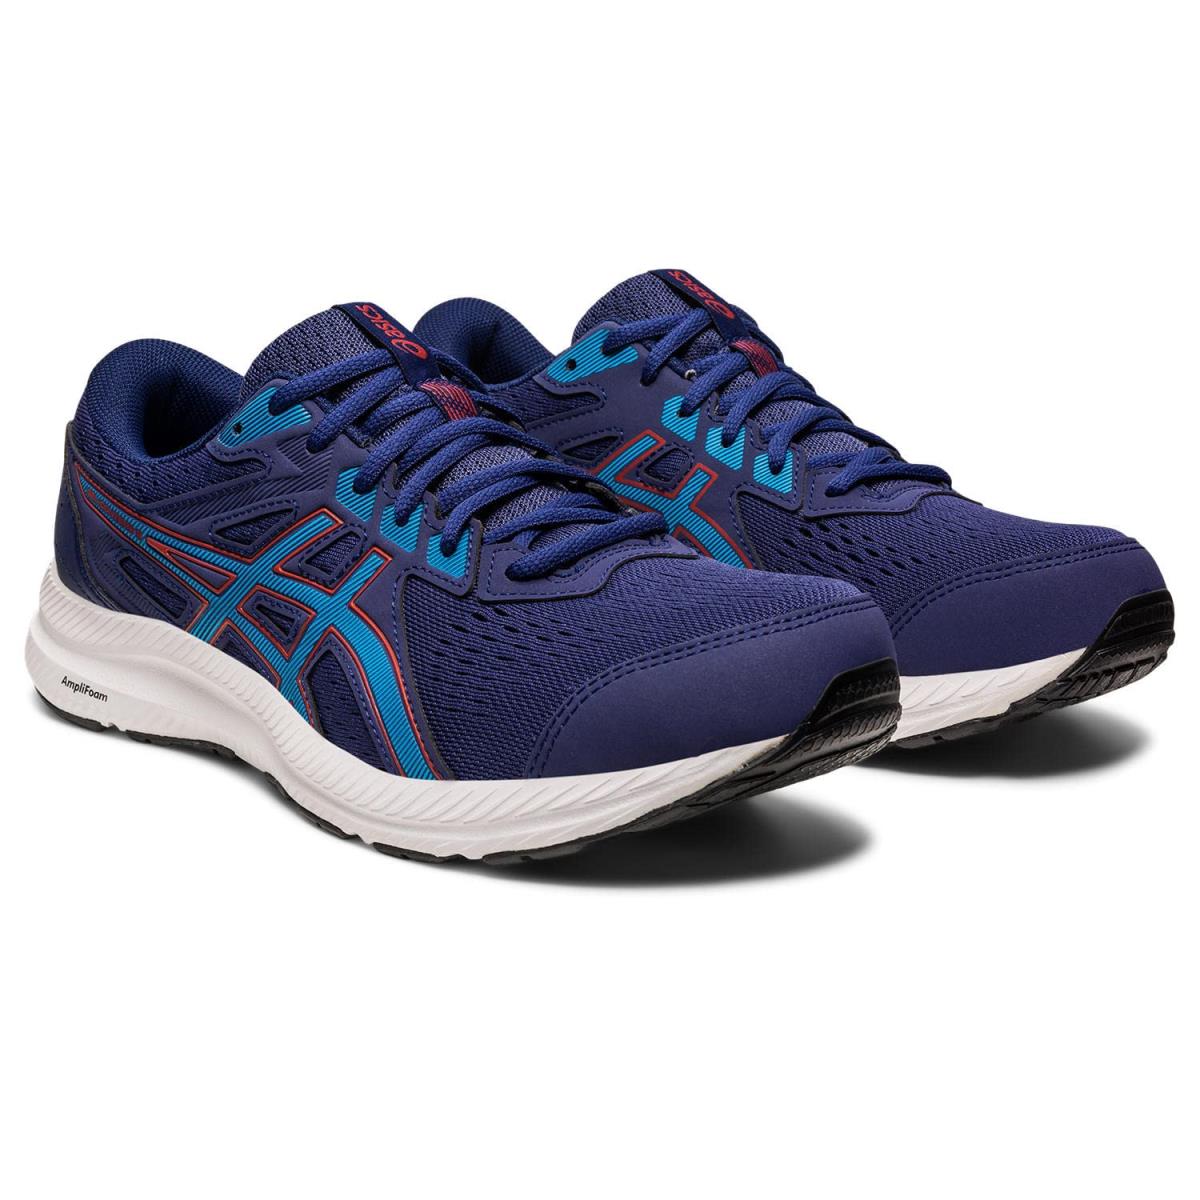 Man`s Sneakers Athletic Shoes Asics Gel-contend 8 Indigo Blue/Island Blue